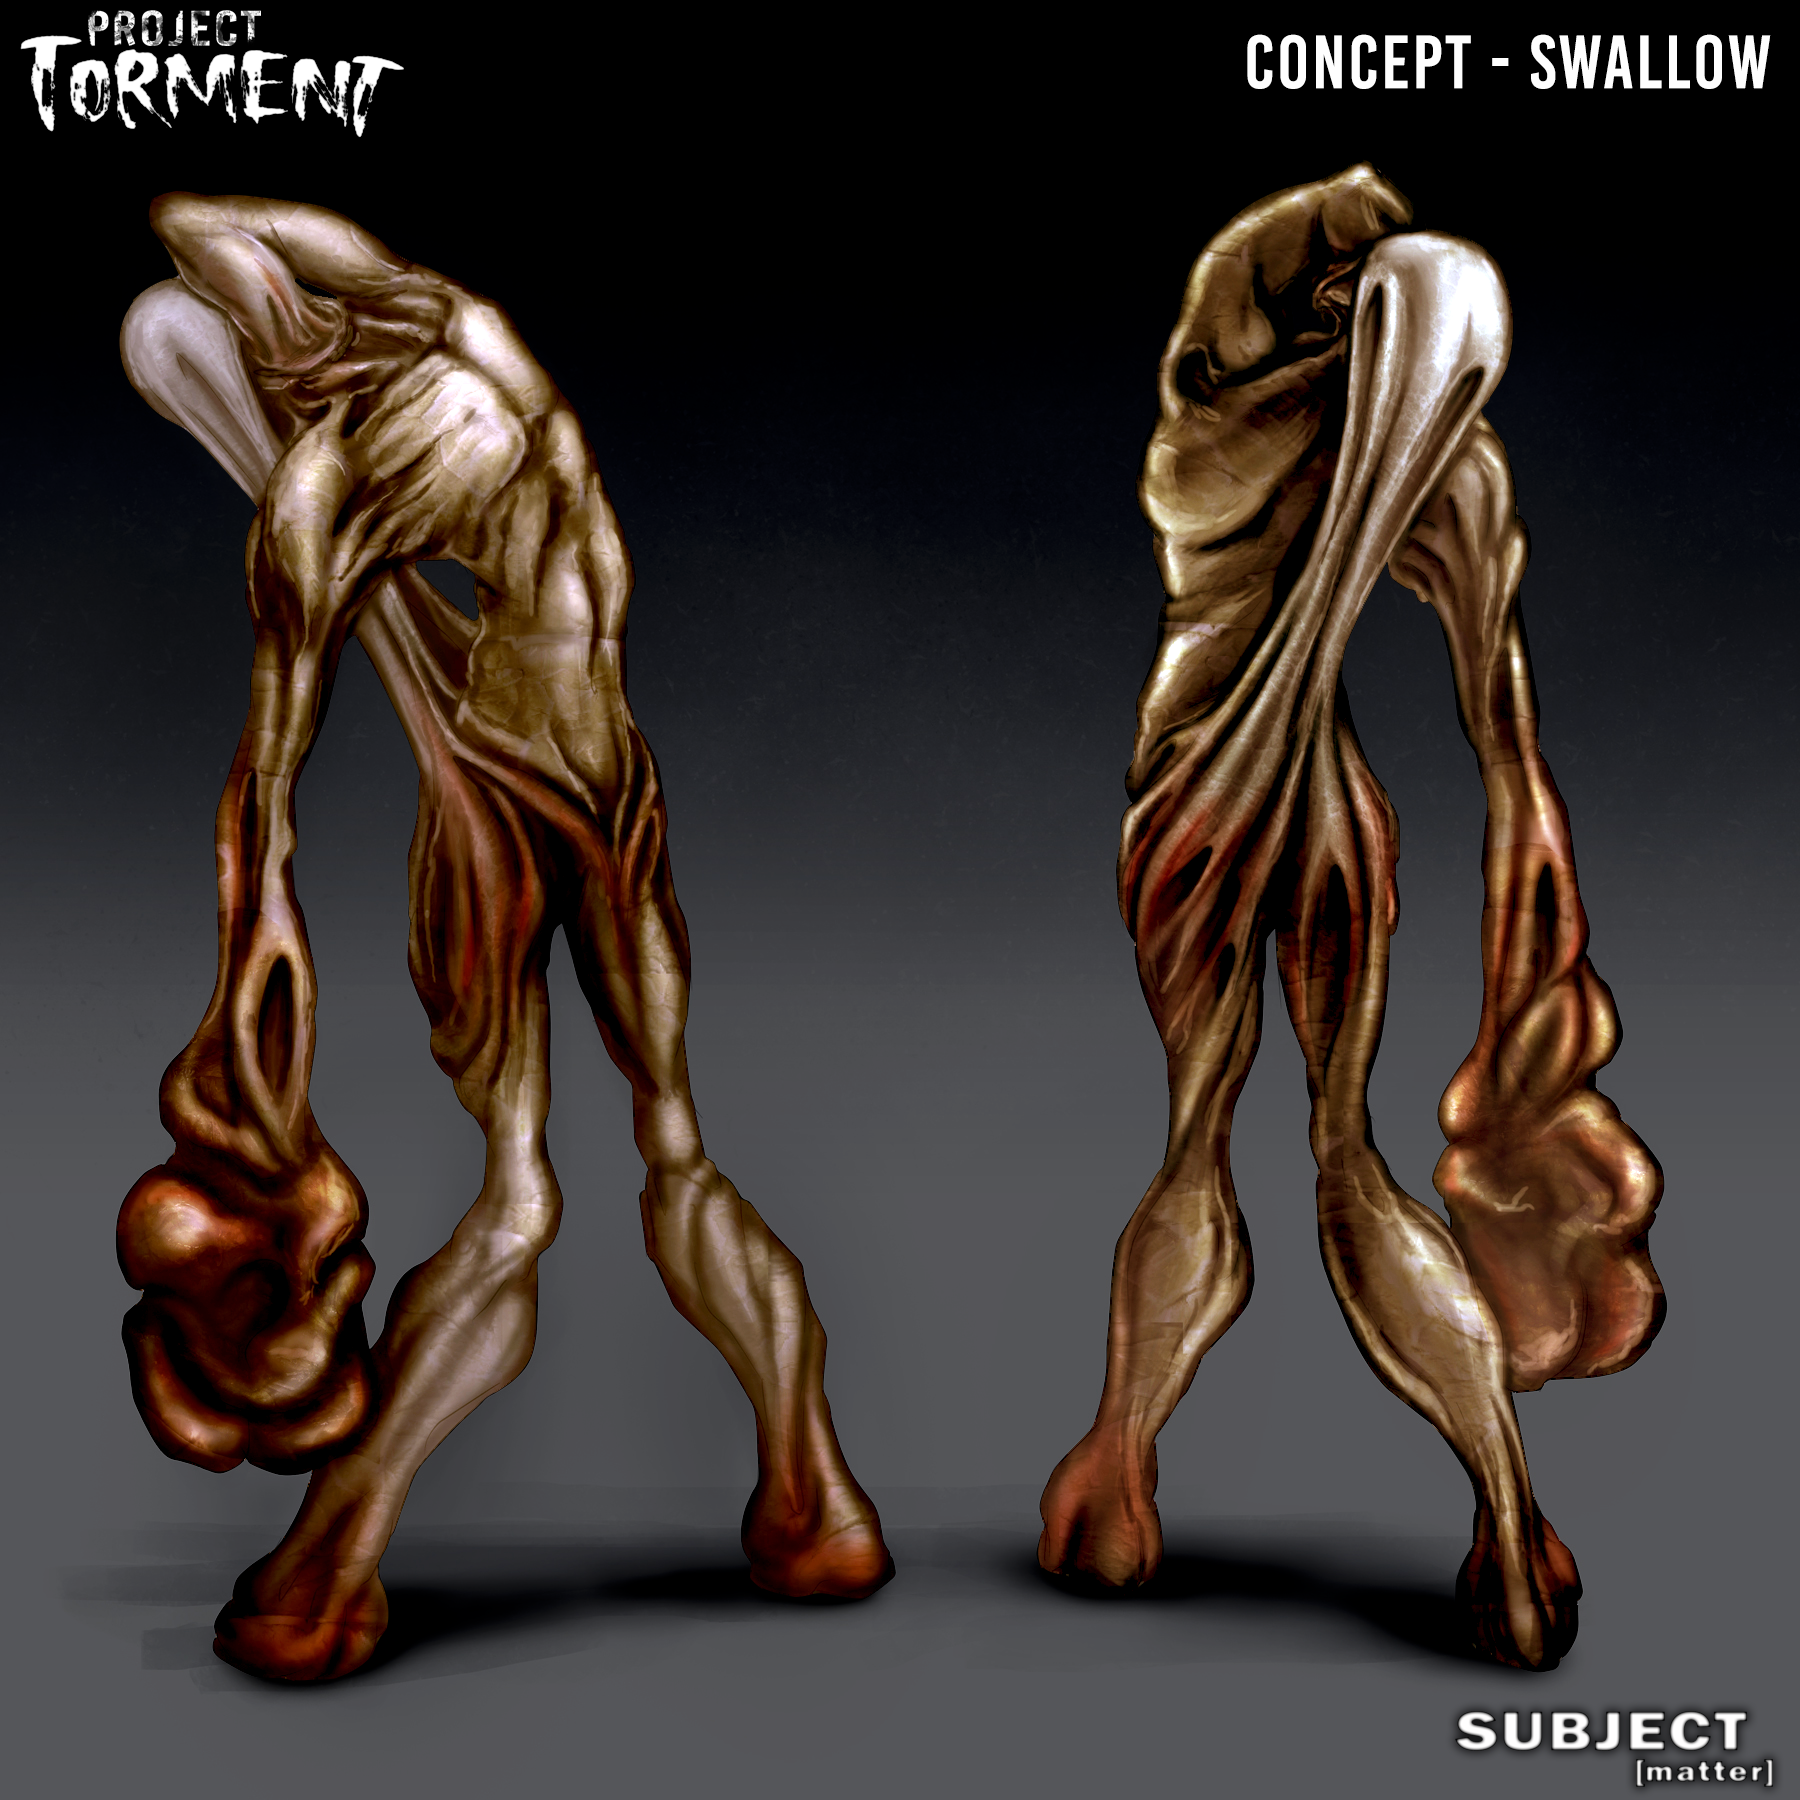 Project Torment Swallow Concept